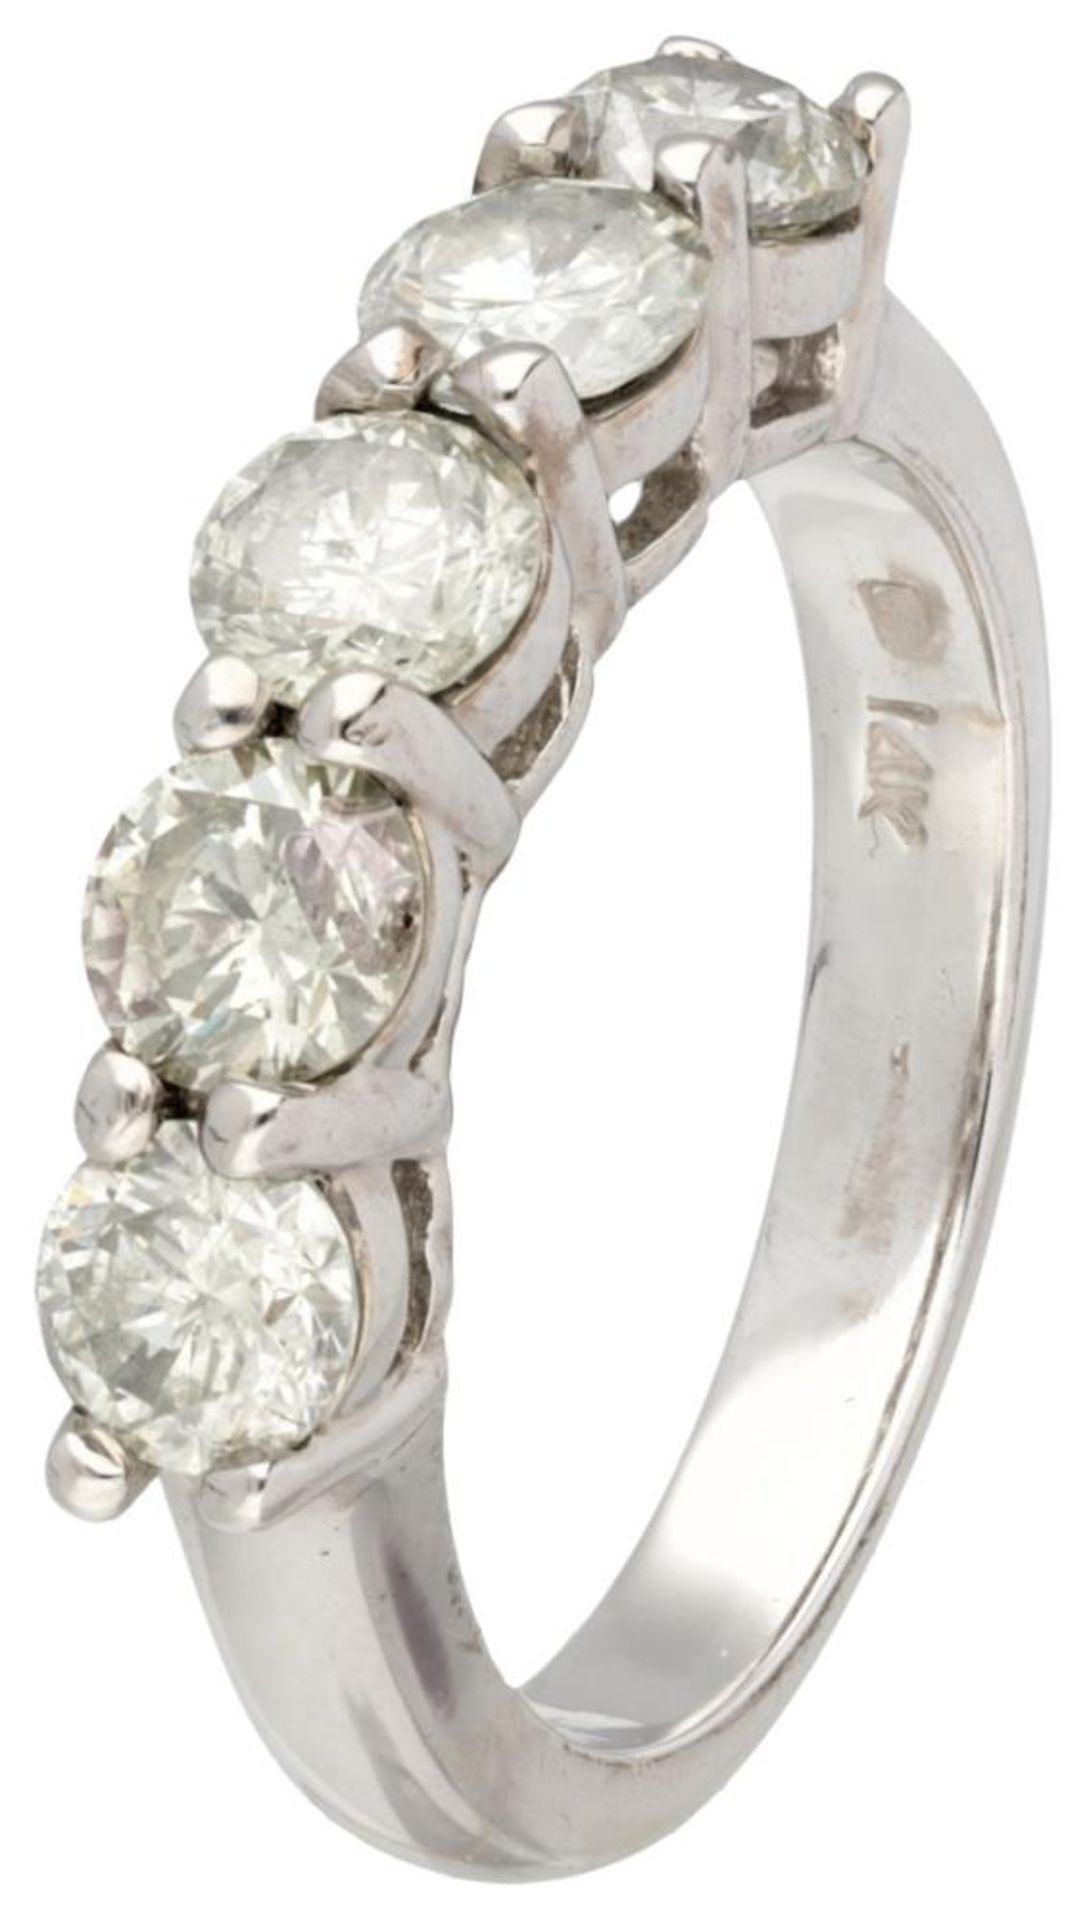 14K. White gold alliance ring set with approx. 1.47 ct. diamond.